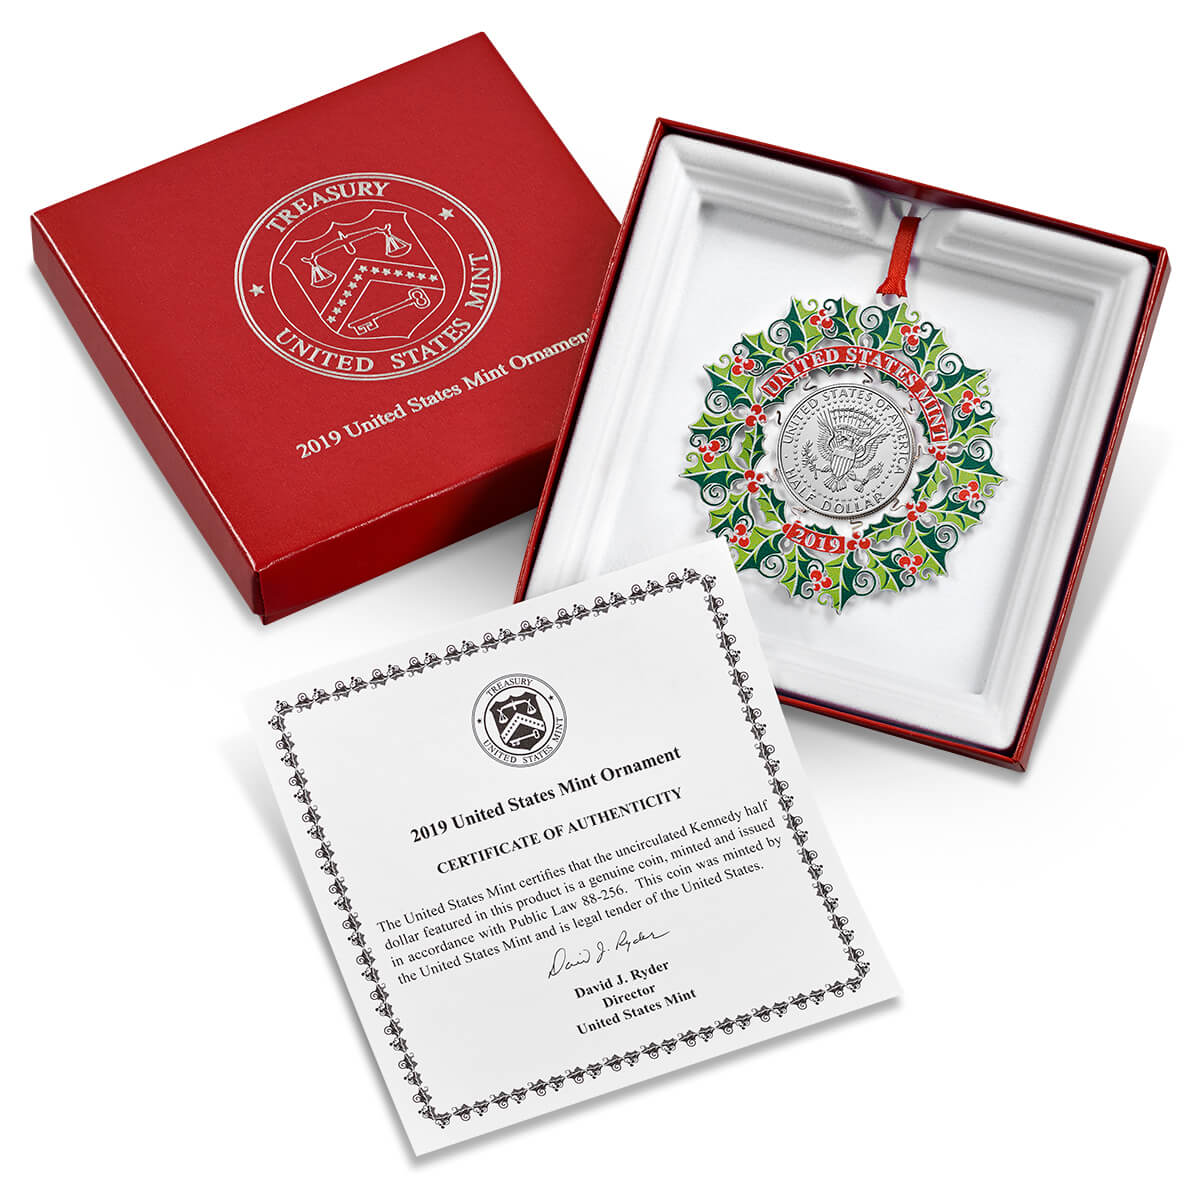 United States Mint Ornament Packaging